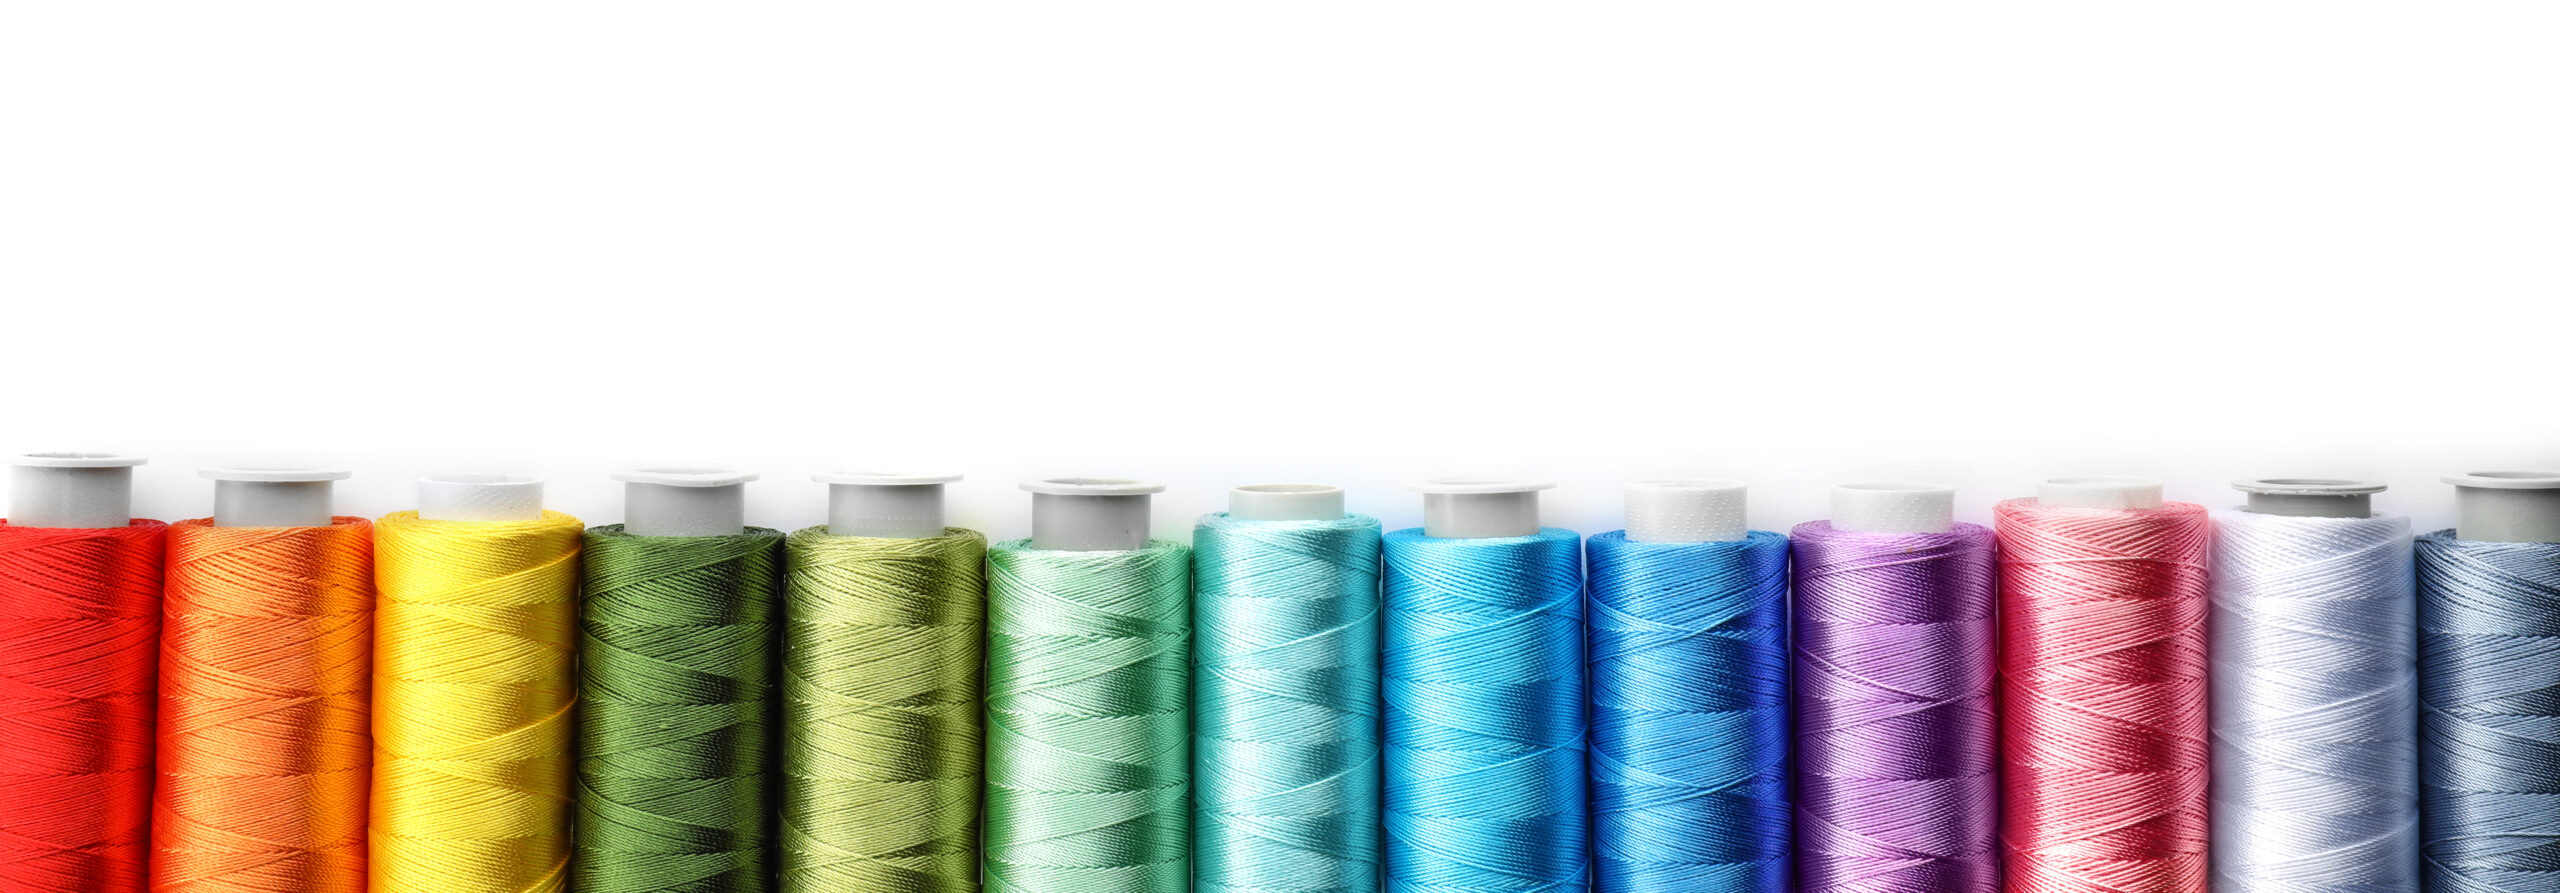 How To Choose The Right Sewing Thread